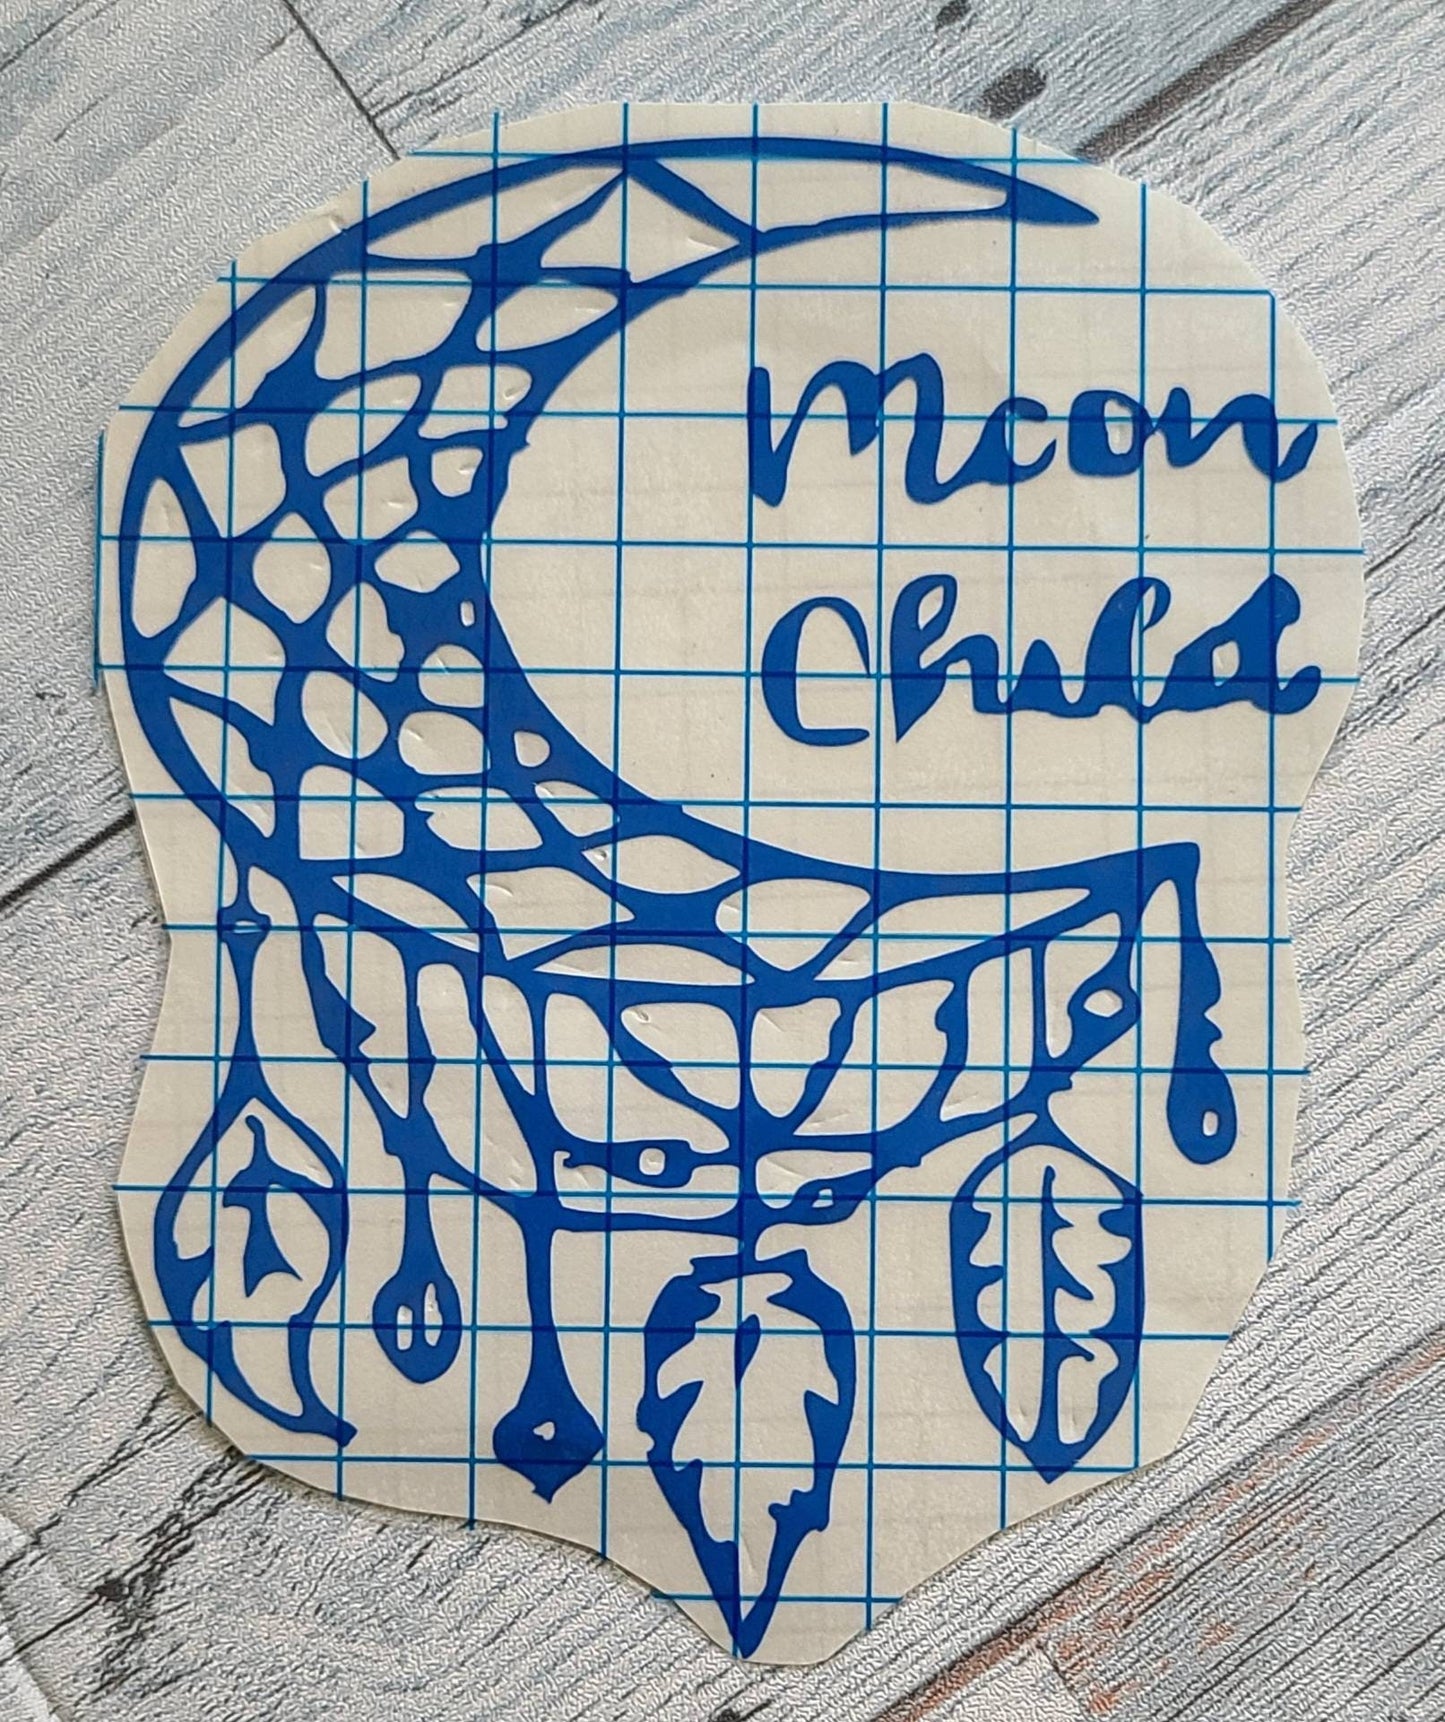 Moon decals, Full moons, Witchy Stickers, Witchcraft Supplies, Vinyl Sticker, gothic, occult, pagan, esoteric